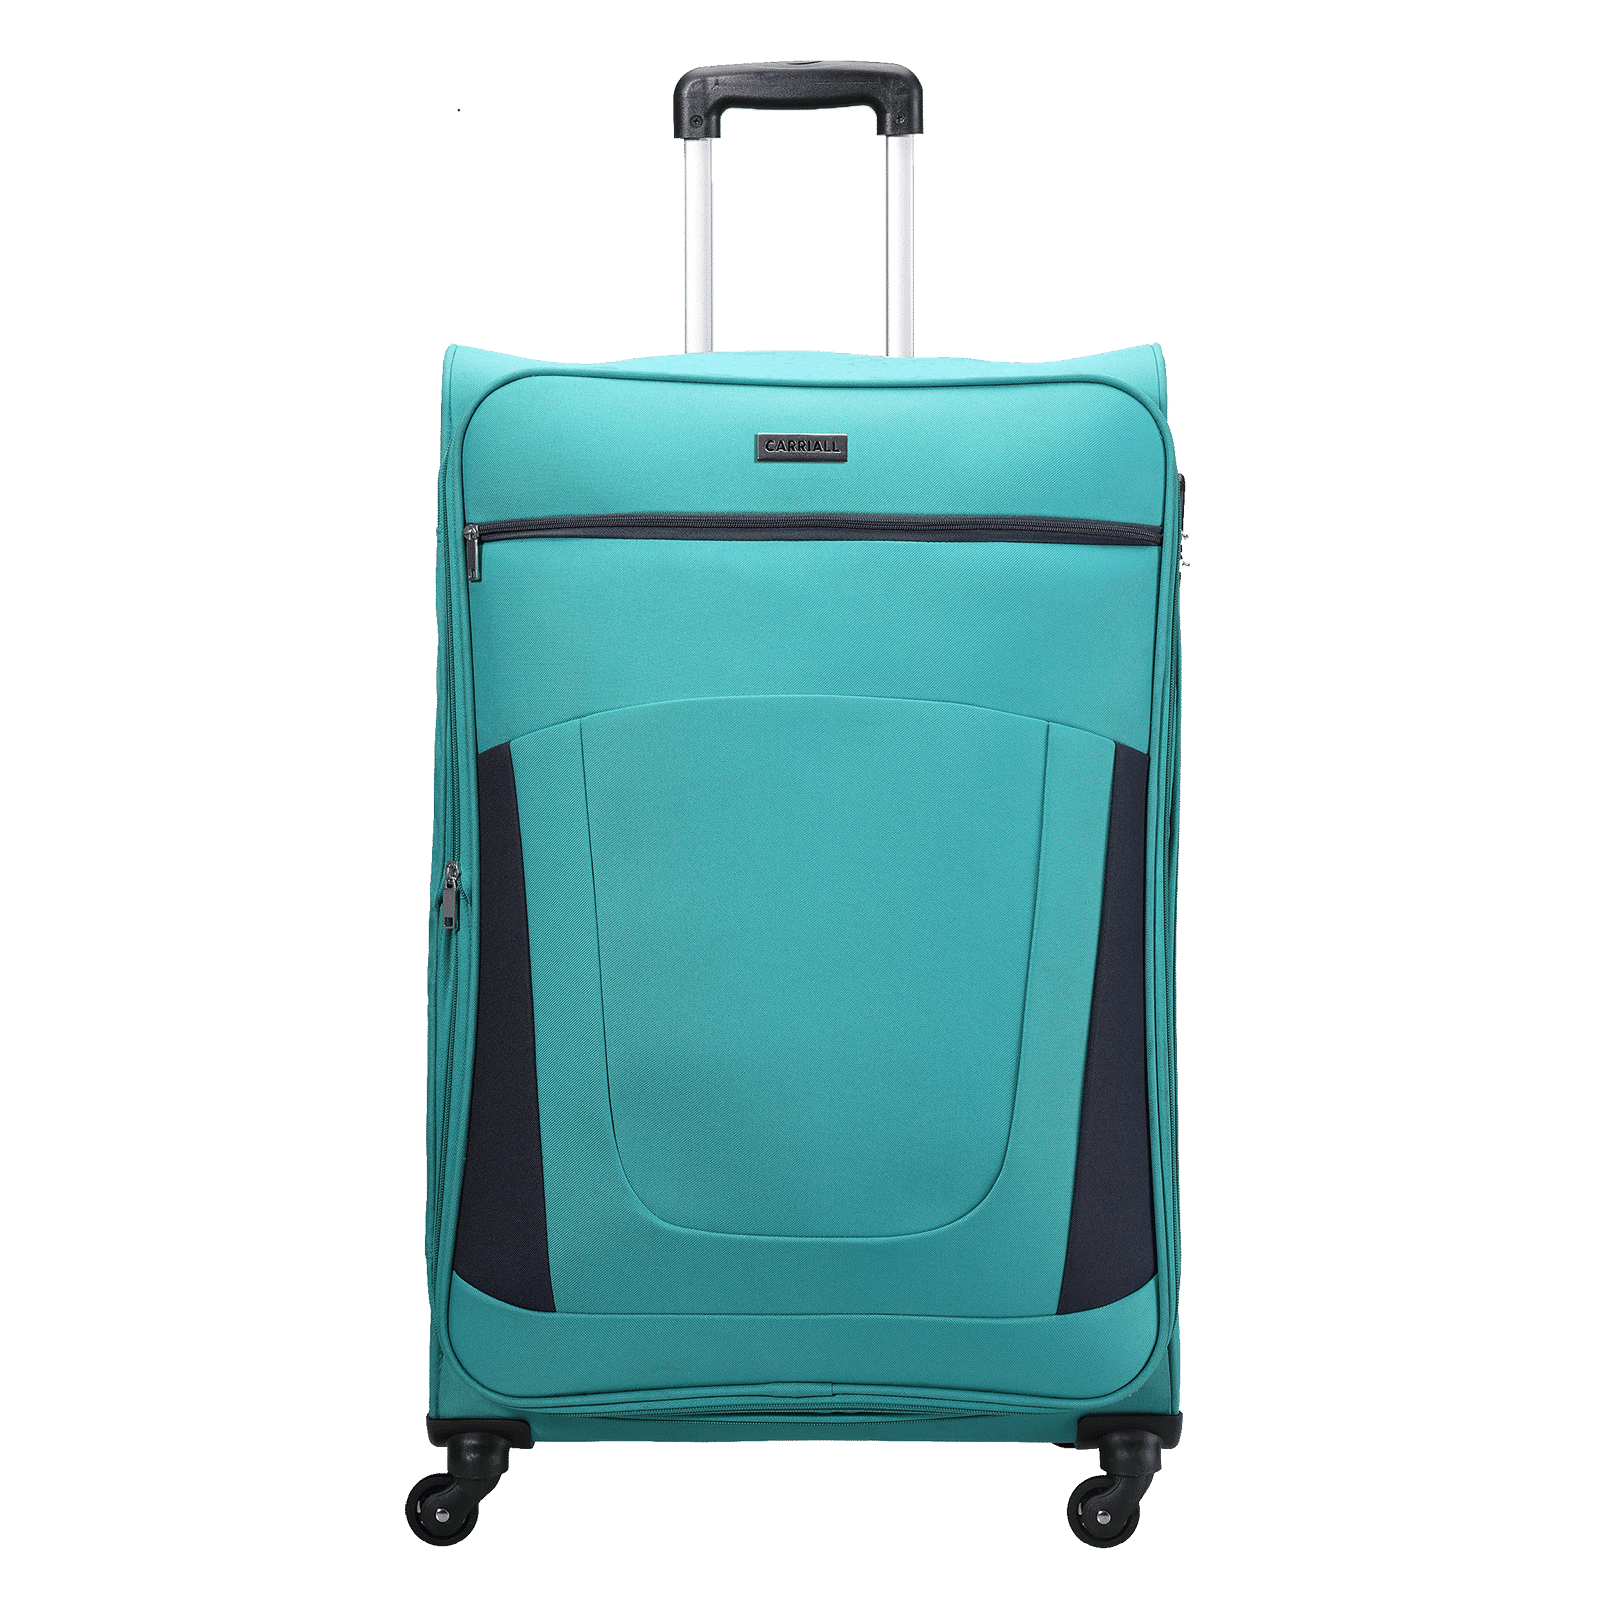 LOTO BAG, TROLLEY BAG – LOTO SAFETY PRODUCTS